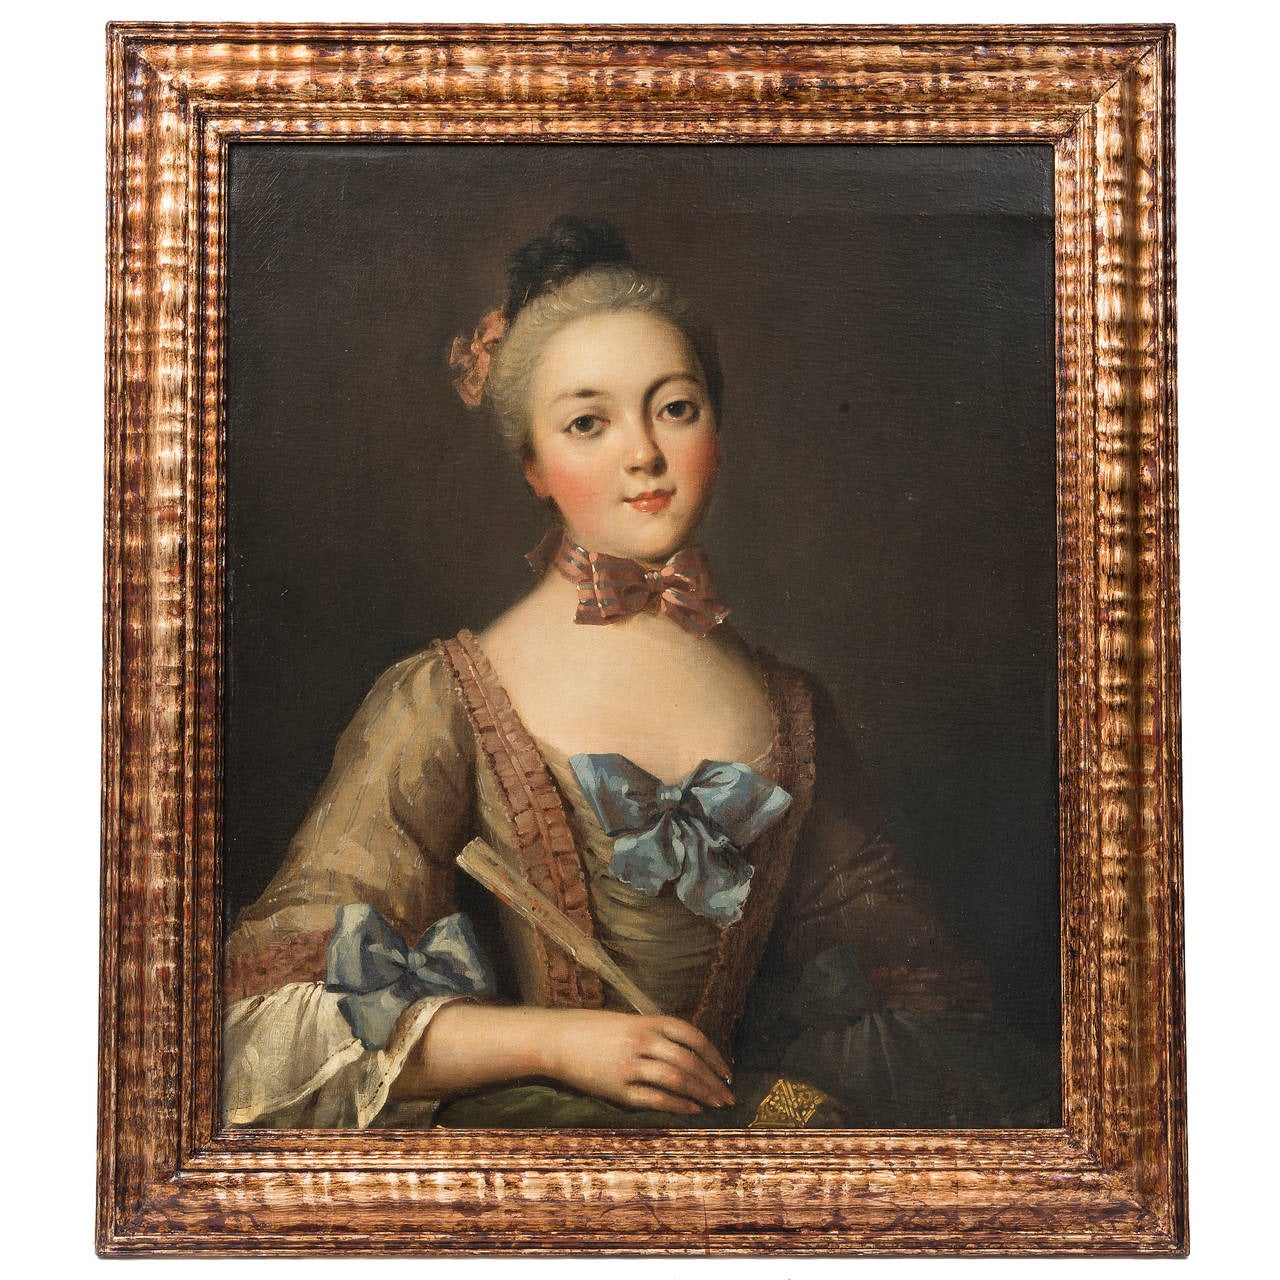 French 18th Century Portrait of a Young Noblewoman, Oil on Canvas